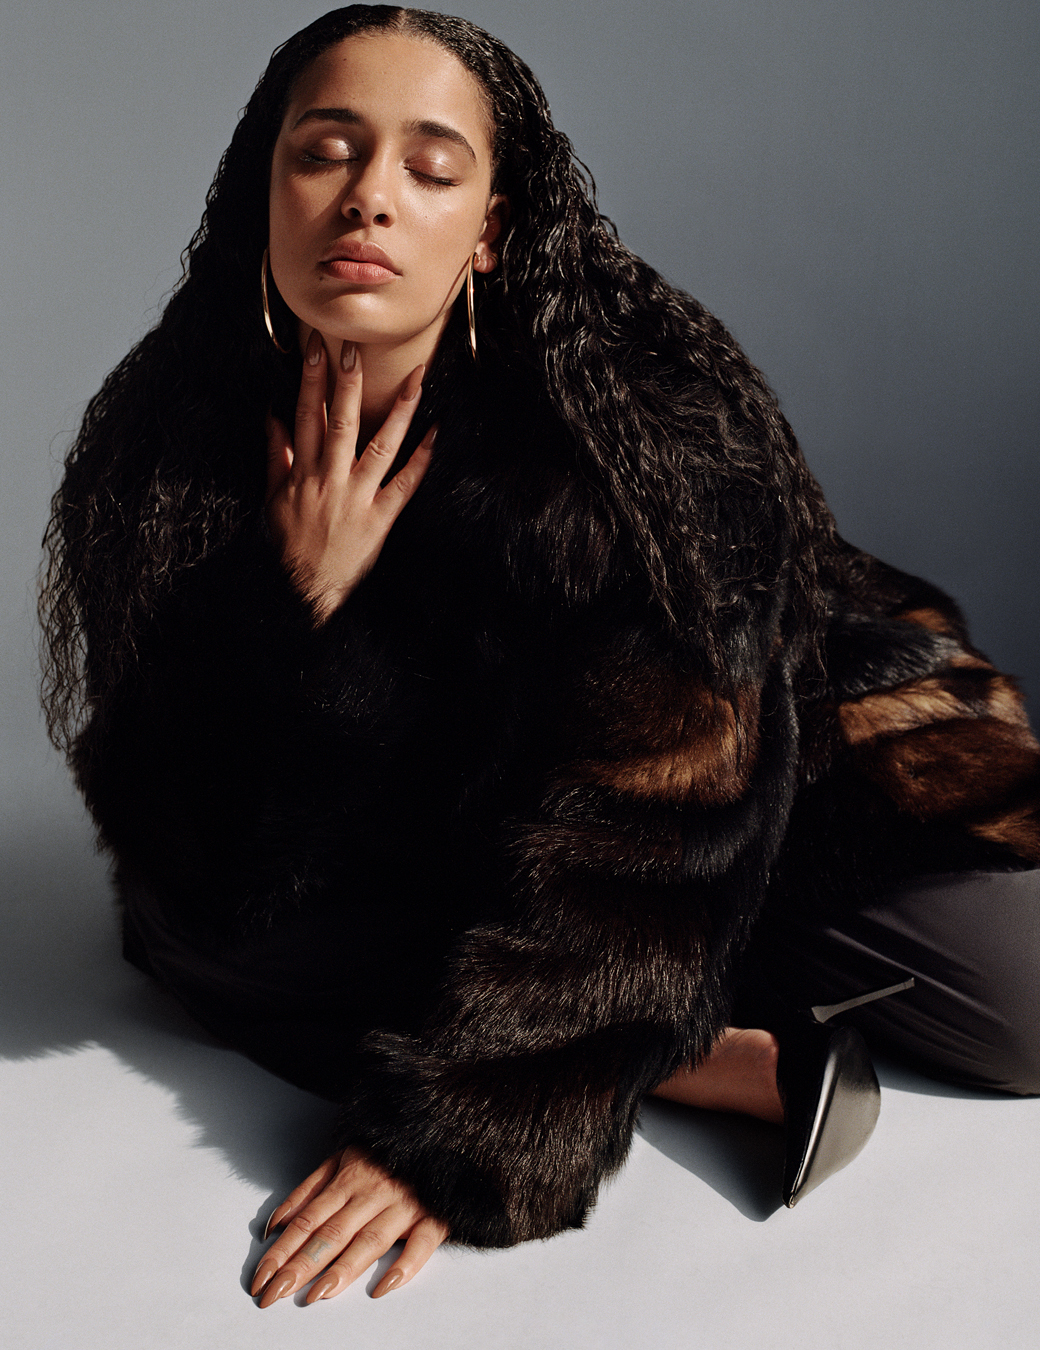 Jorja Smith photographed by Alasdair McLellan for i-D no. 372 The Summer! Issue